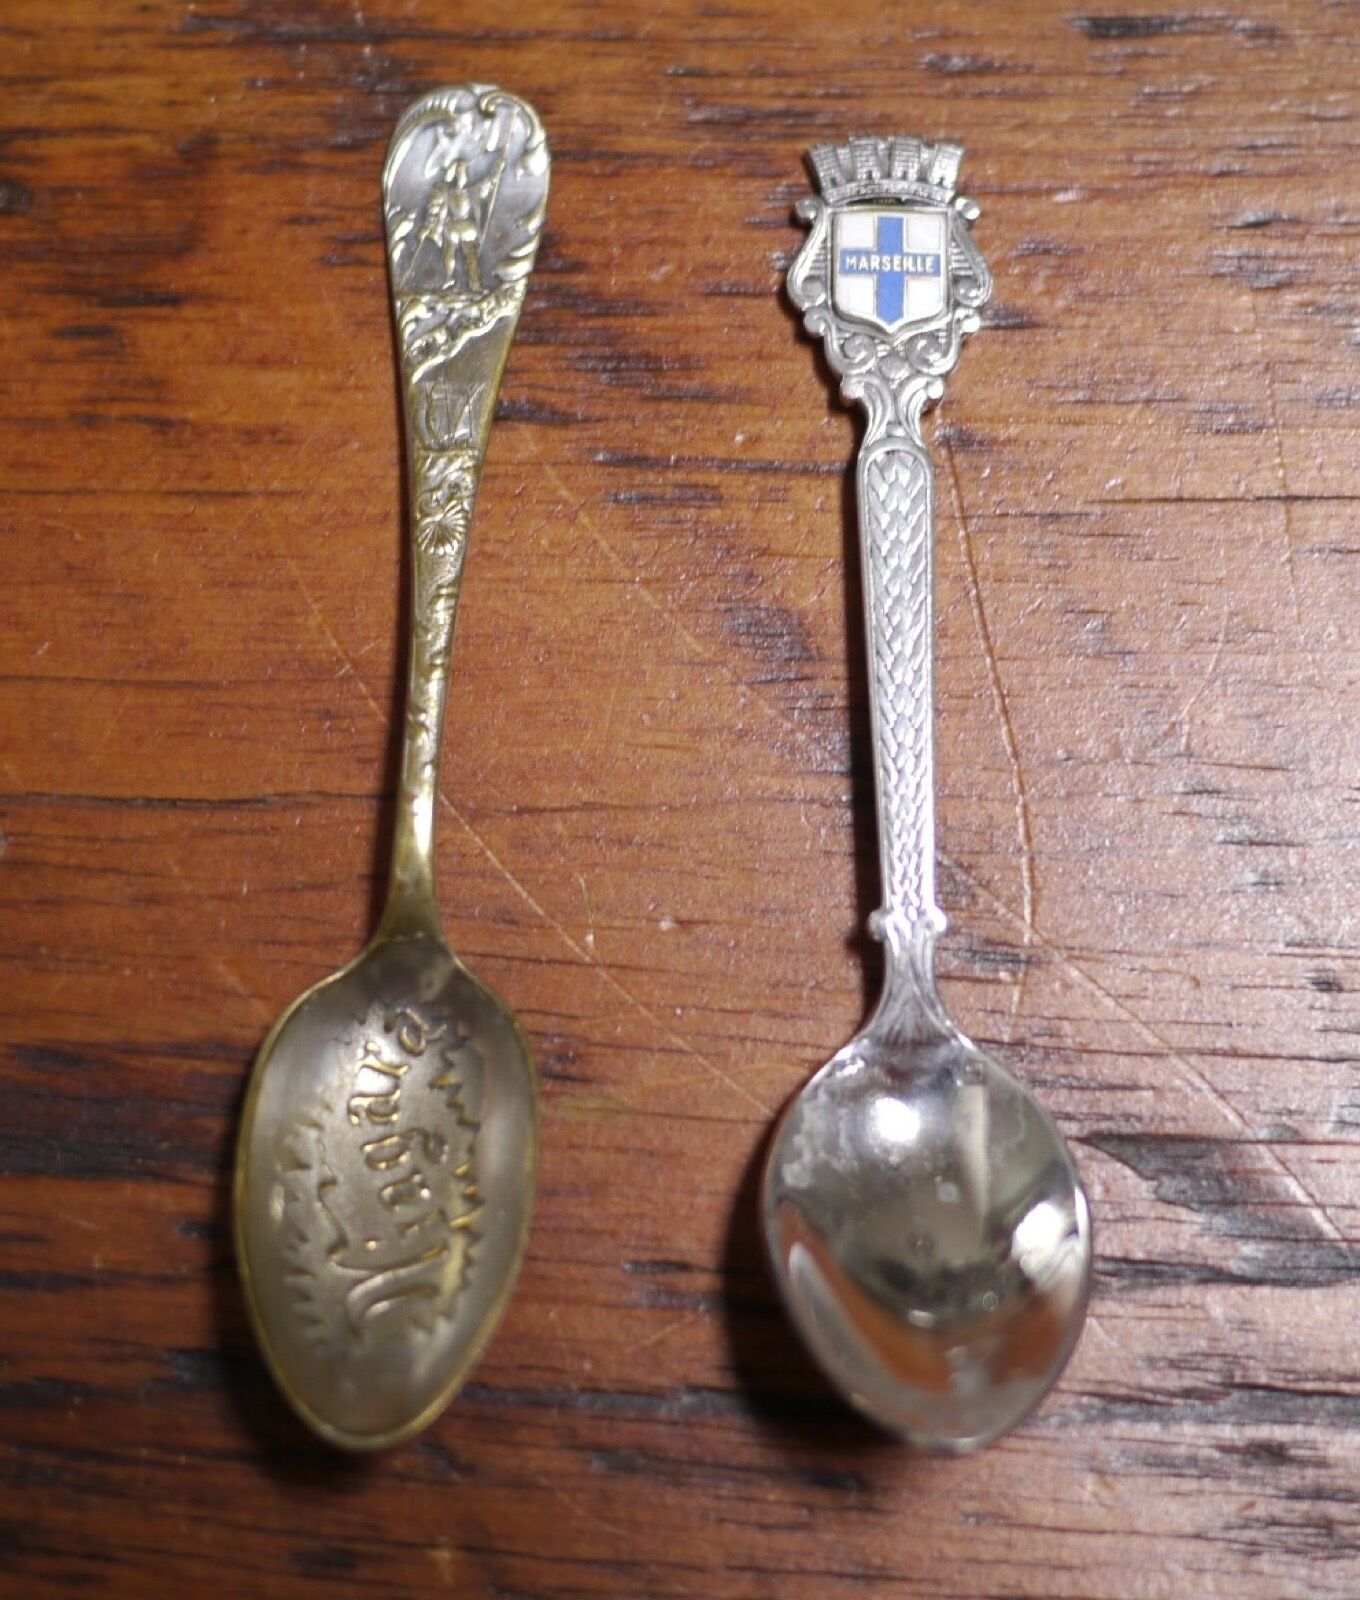 Primary image for Pair of Vintage Marseille Niagara Silverplated Stainless Collectible Baby Spoons